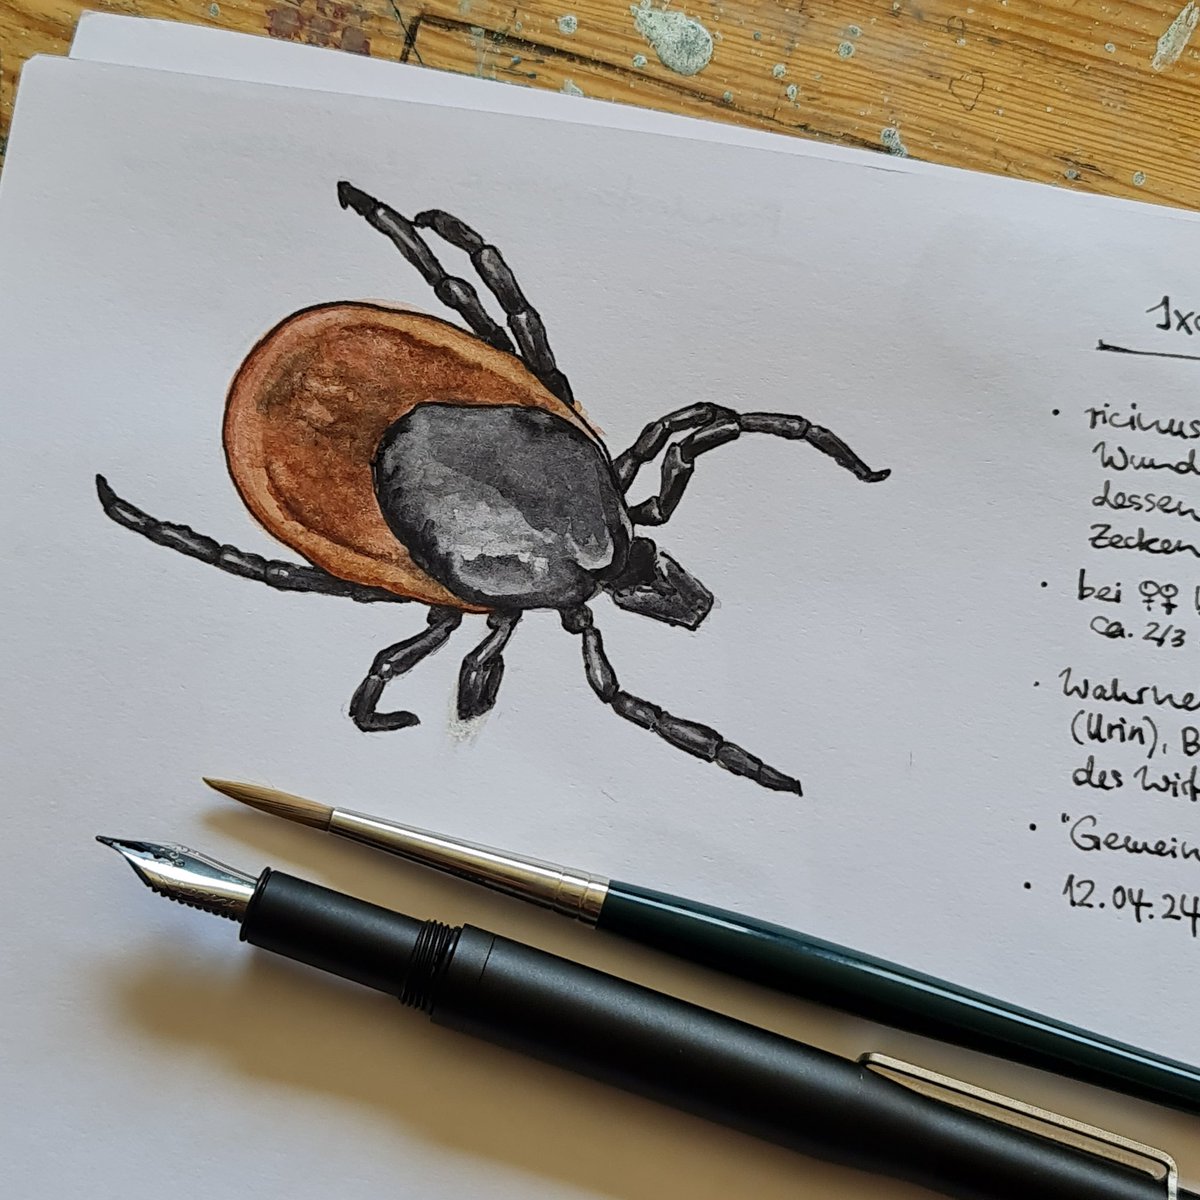 #littlecritterdiary DAY 21 Ixodes ricinus, everybody's anti-darling, from the garden. A hungry female, probably detecting my breath and sweat while I'm weeding.